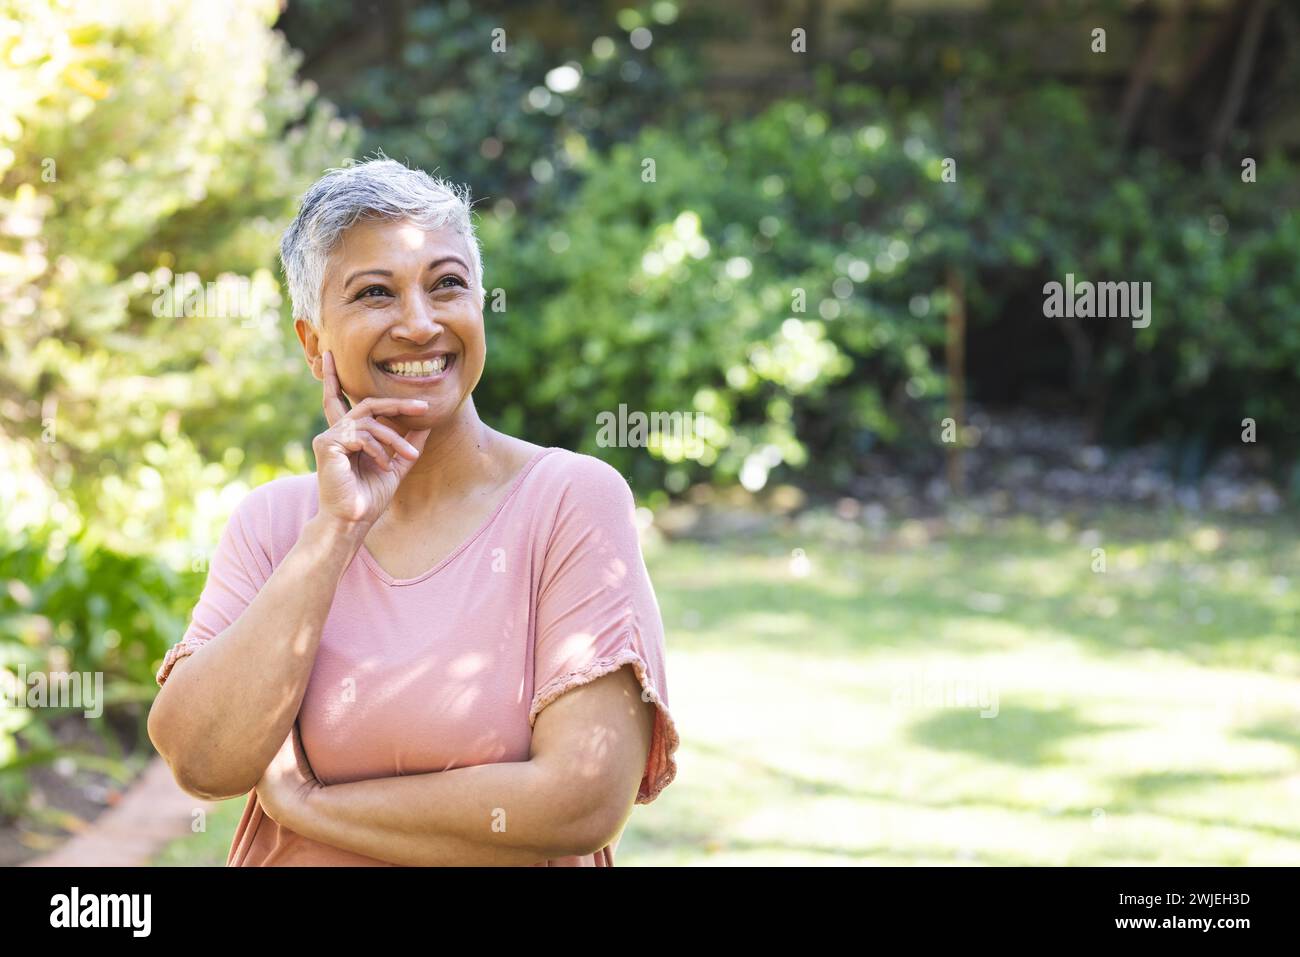 A mature biracial senior woman enjoys a sunny day in the garden, with copy space unaltered Stock Photo